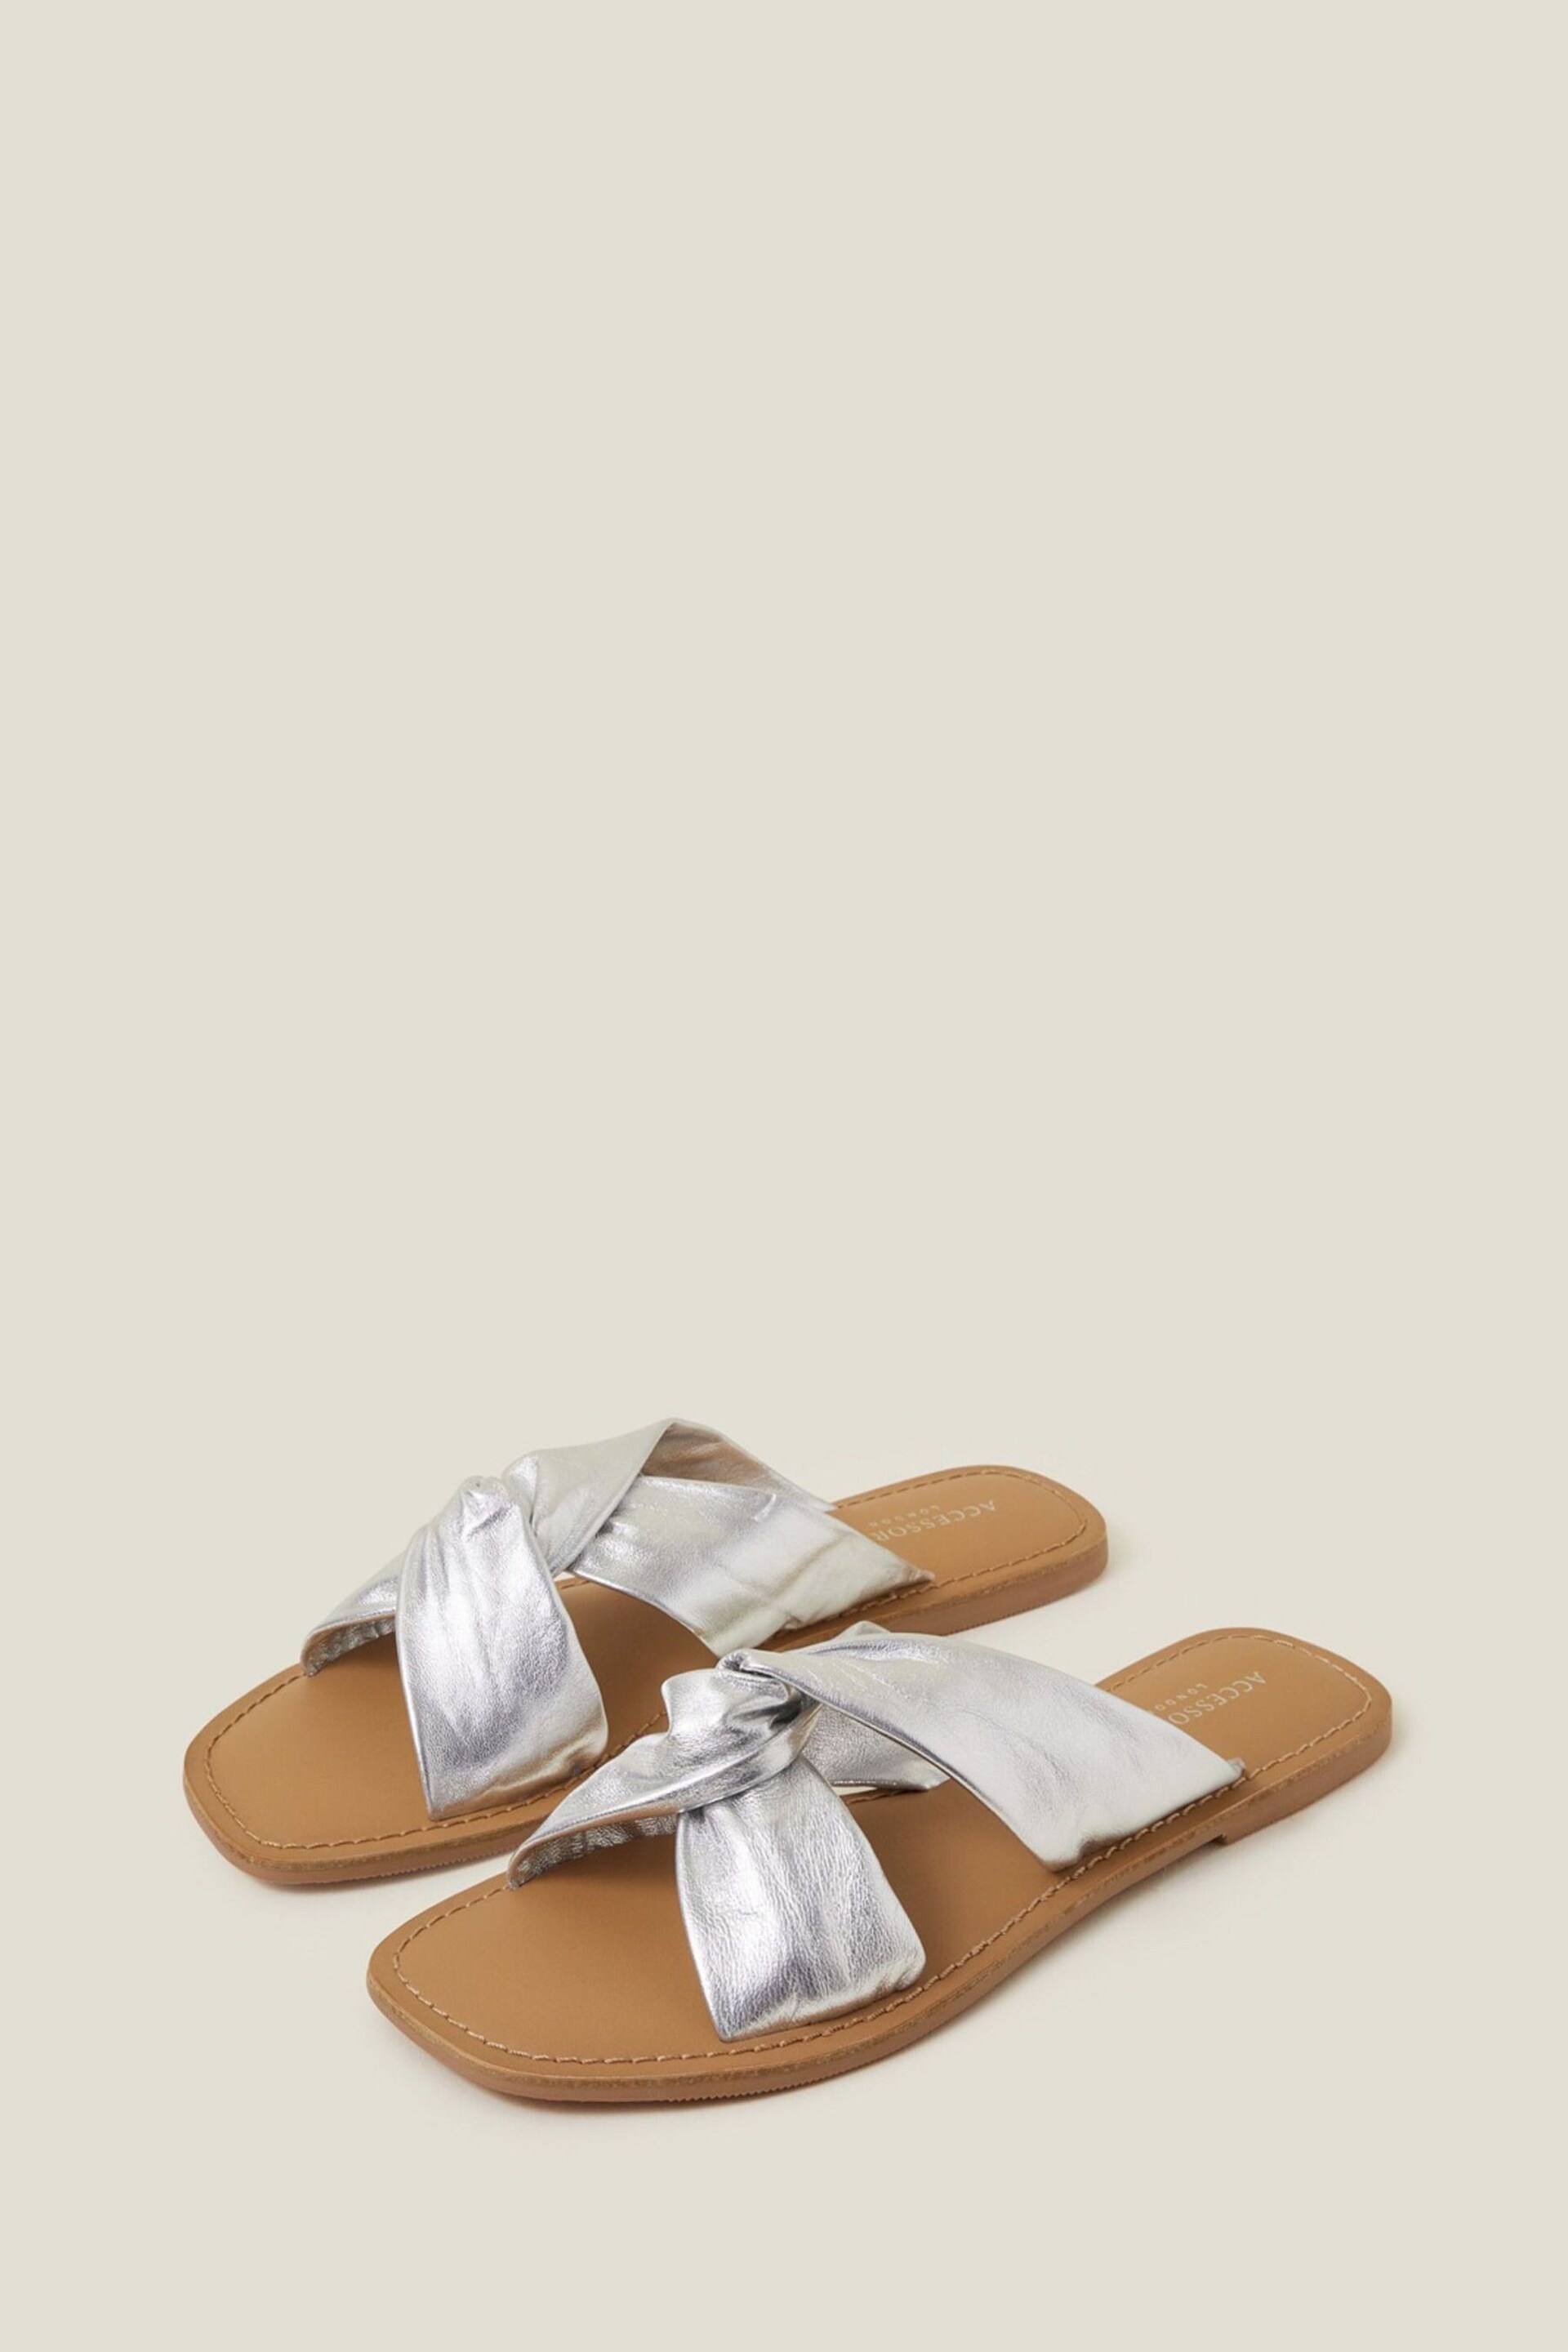 Accessorize Silver Leather Knot Sandals - Image 2 of 4